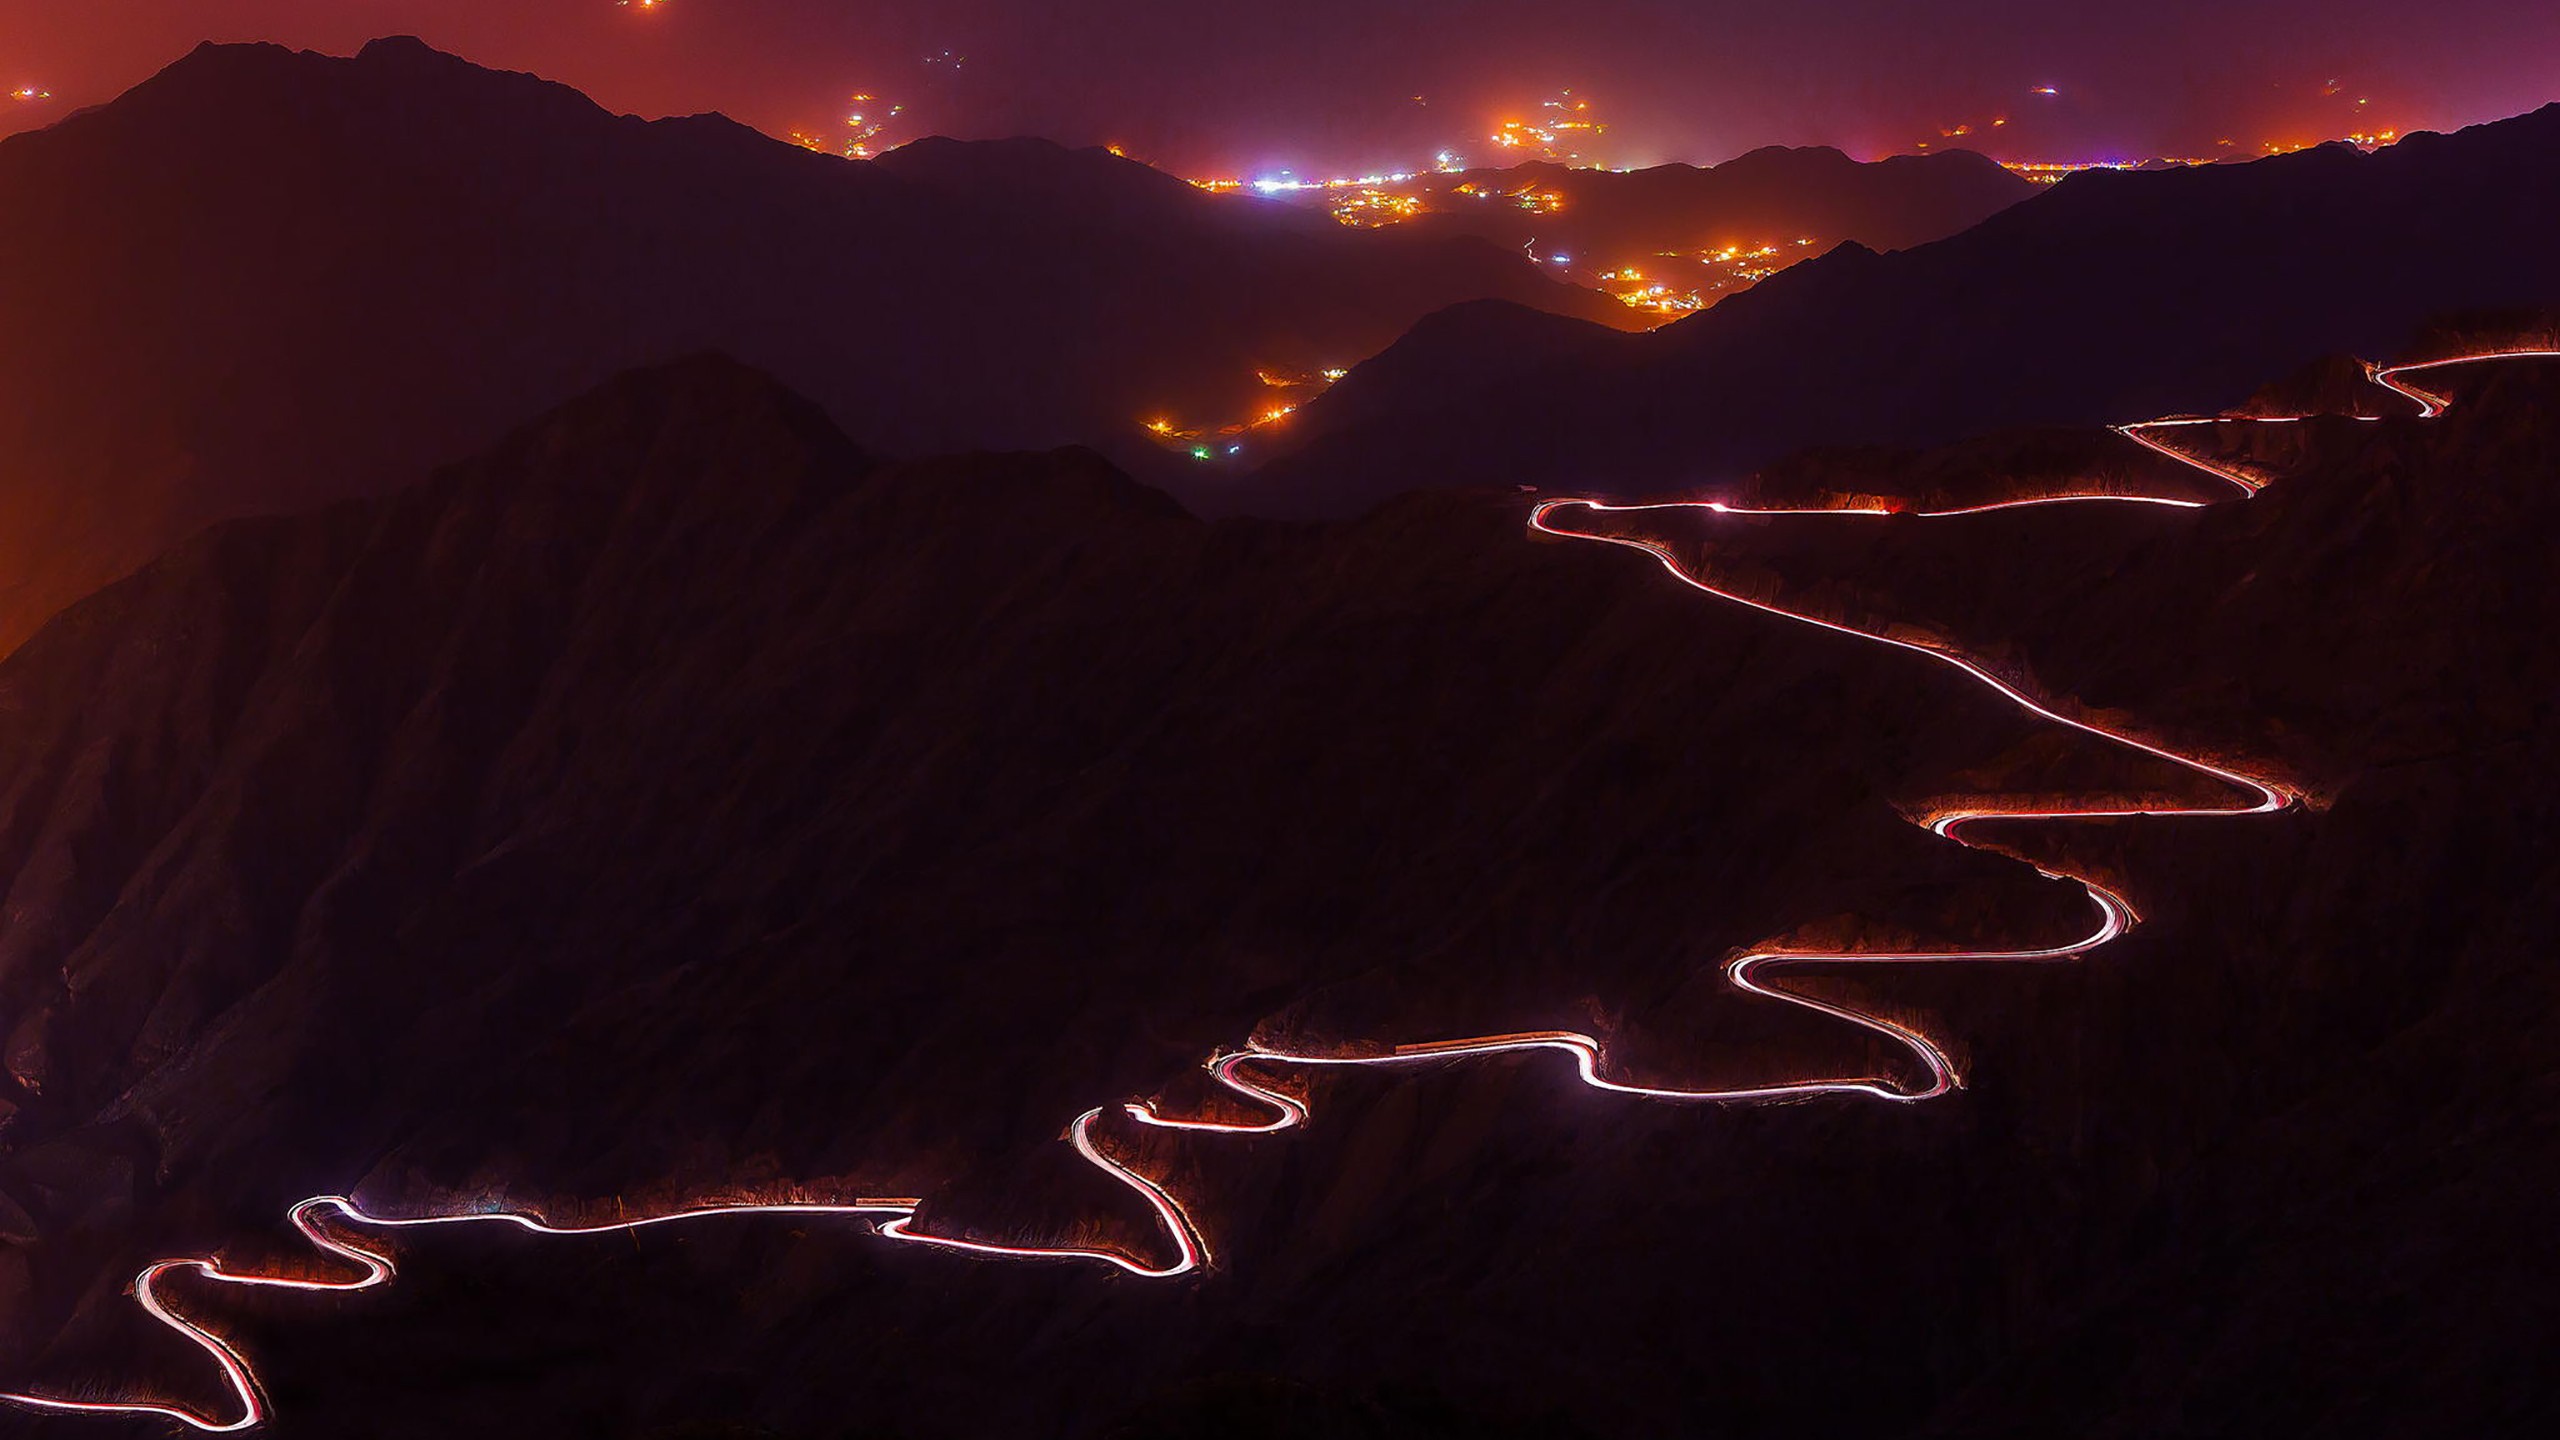 General 2560x1440 long exposure landscape light trails hairpin turns city lights red night path mist road mountains nature low light